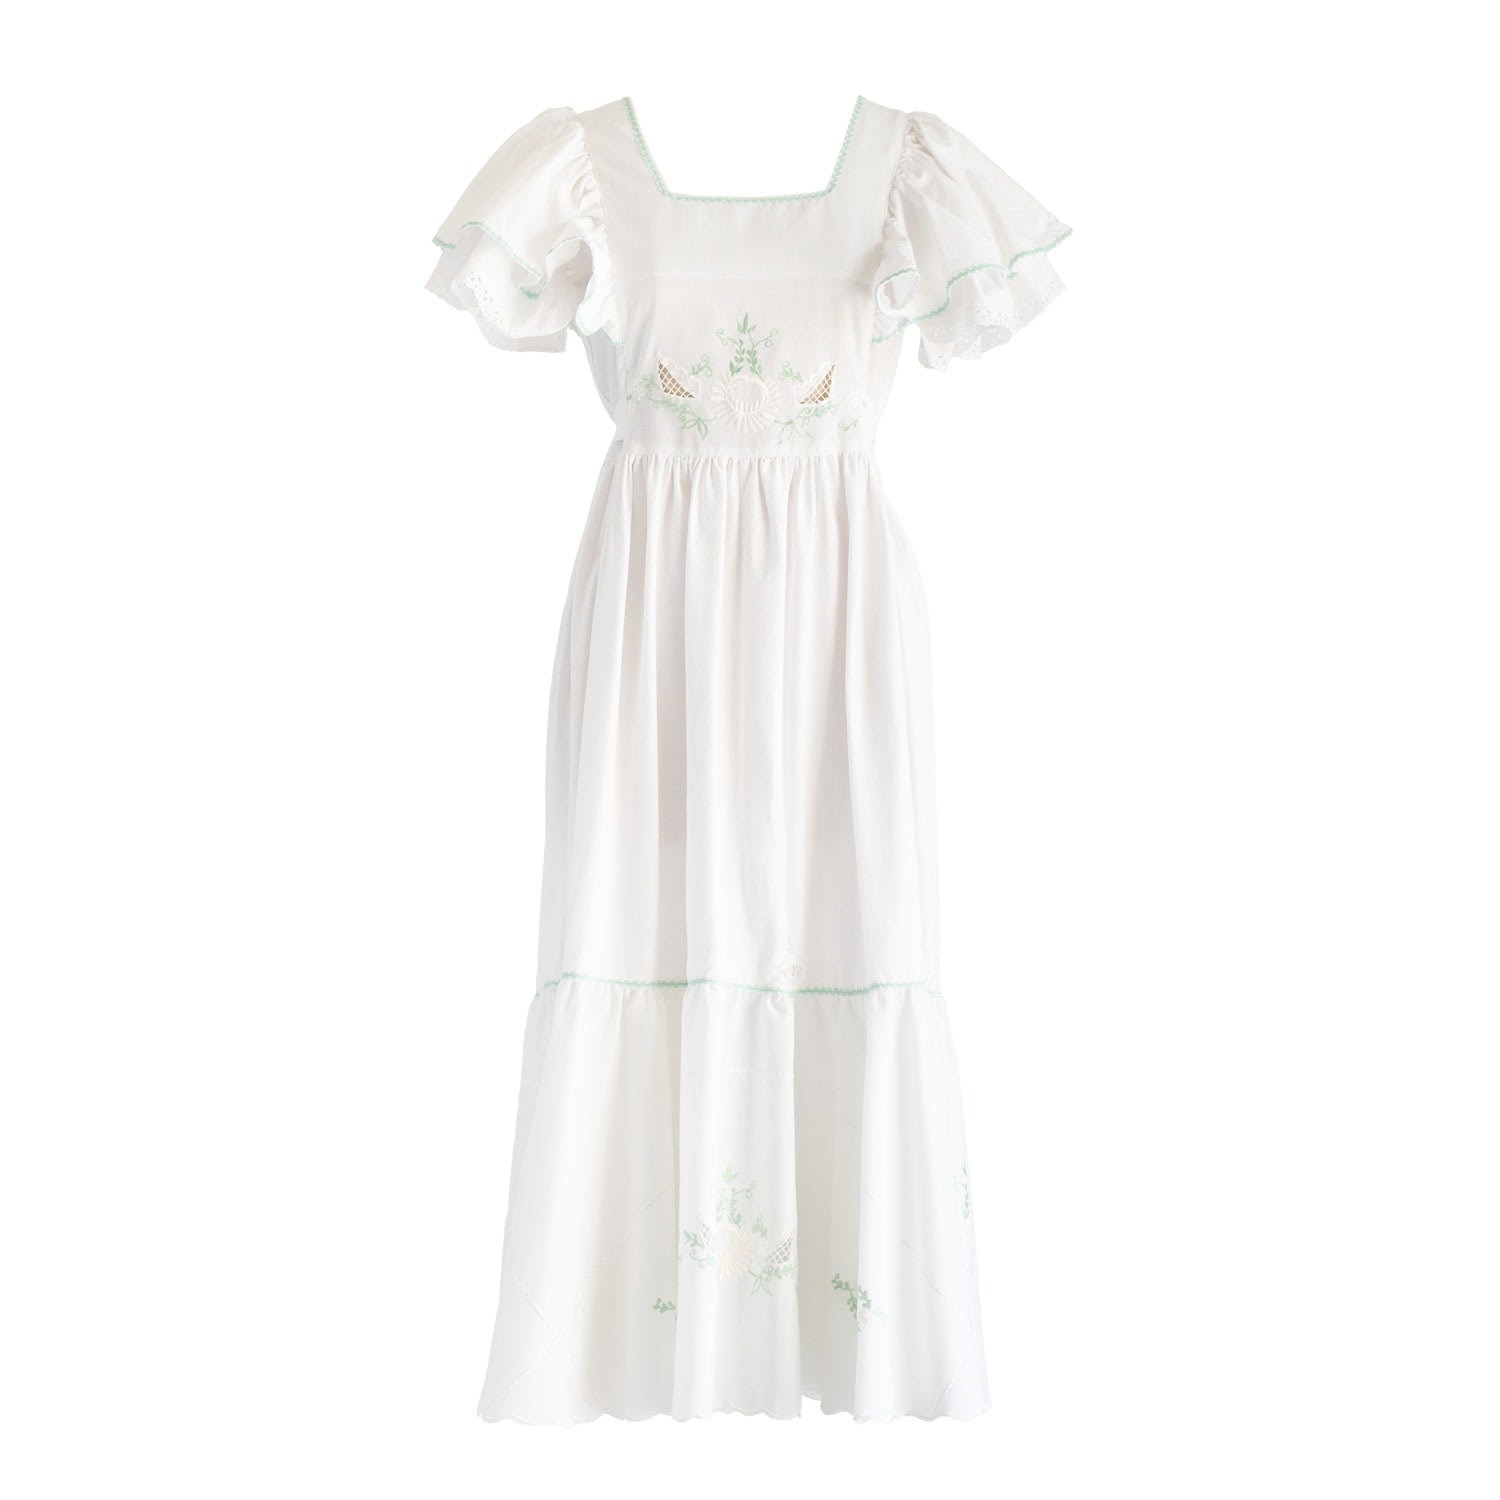 Women’s White Re-Design Upcycled Hand Embroidered Green Border Maxi Dress Large Sugar Cream Vintage